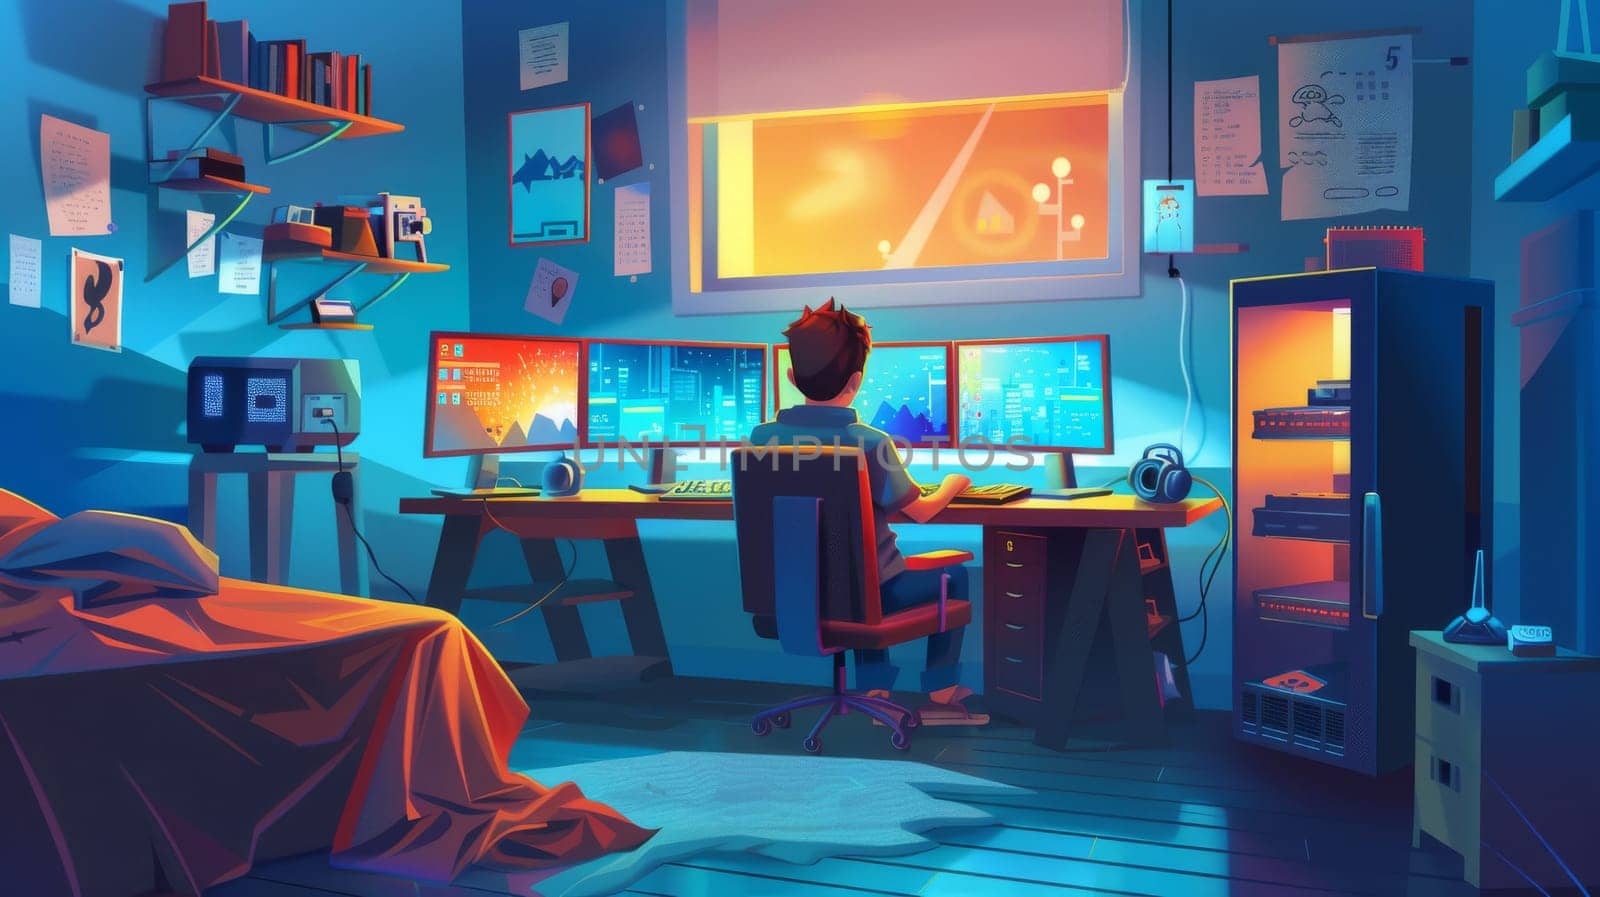 The interior of a teenager's room filled with multiple computer monitors, an unmade bed, a 3D printer on a shelf, and a placard hanging on the wall. Cartoon modern illustration of a teenager's room